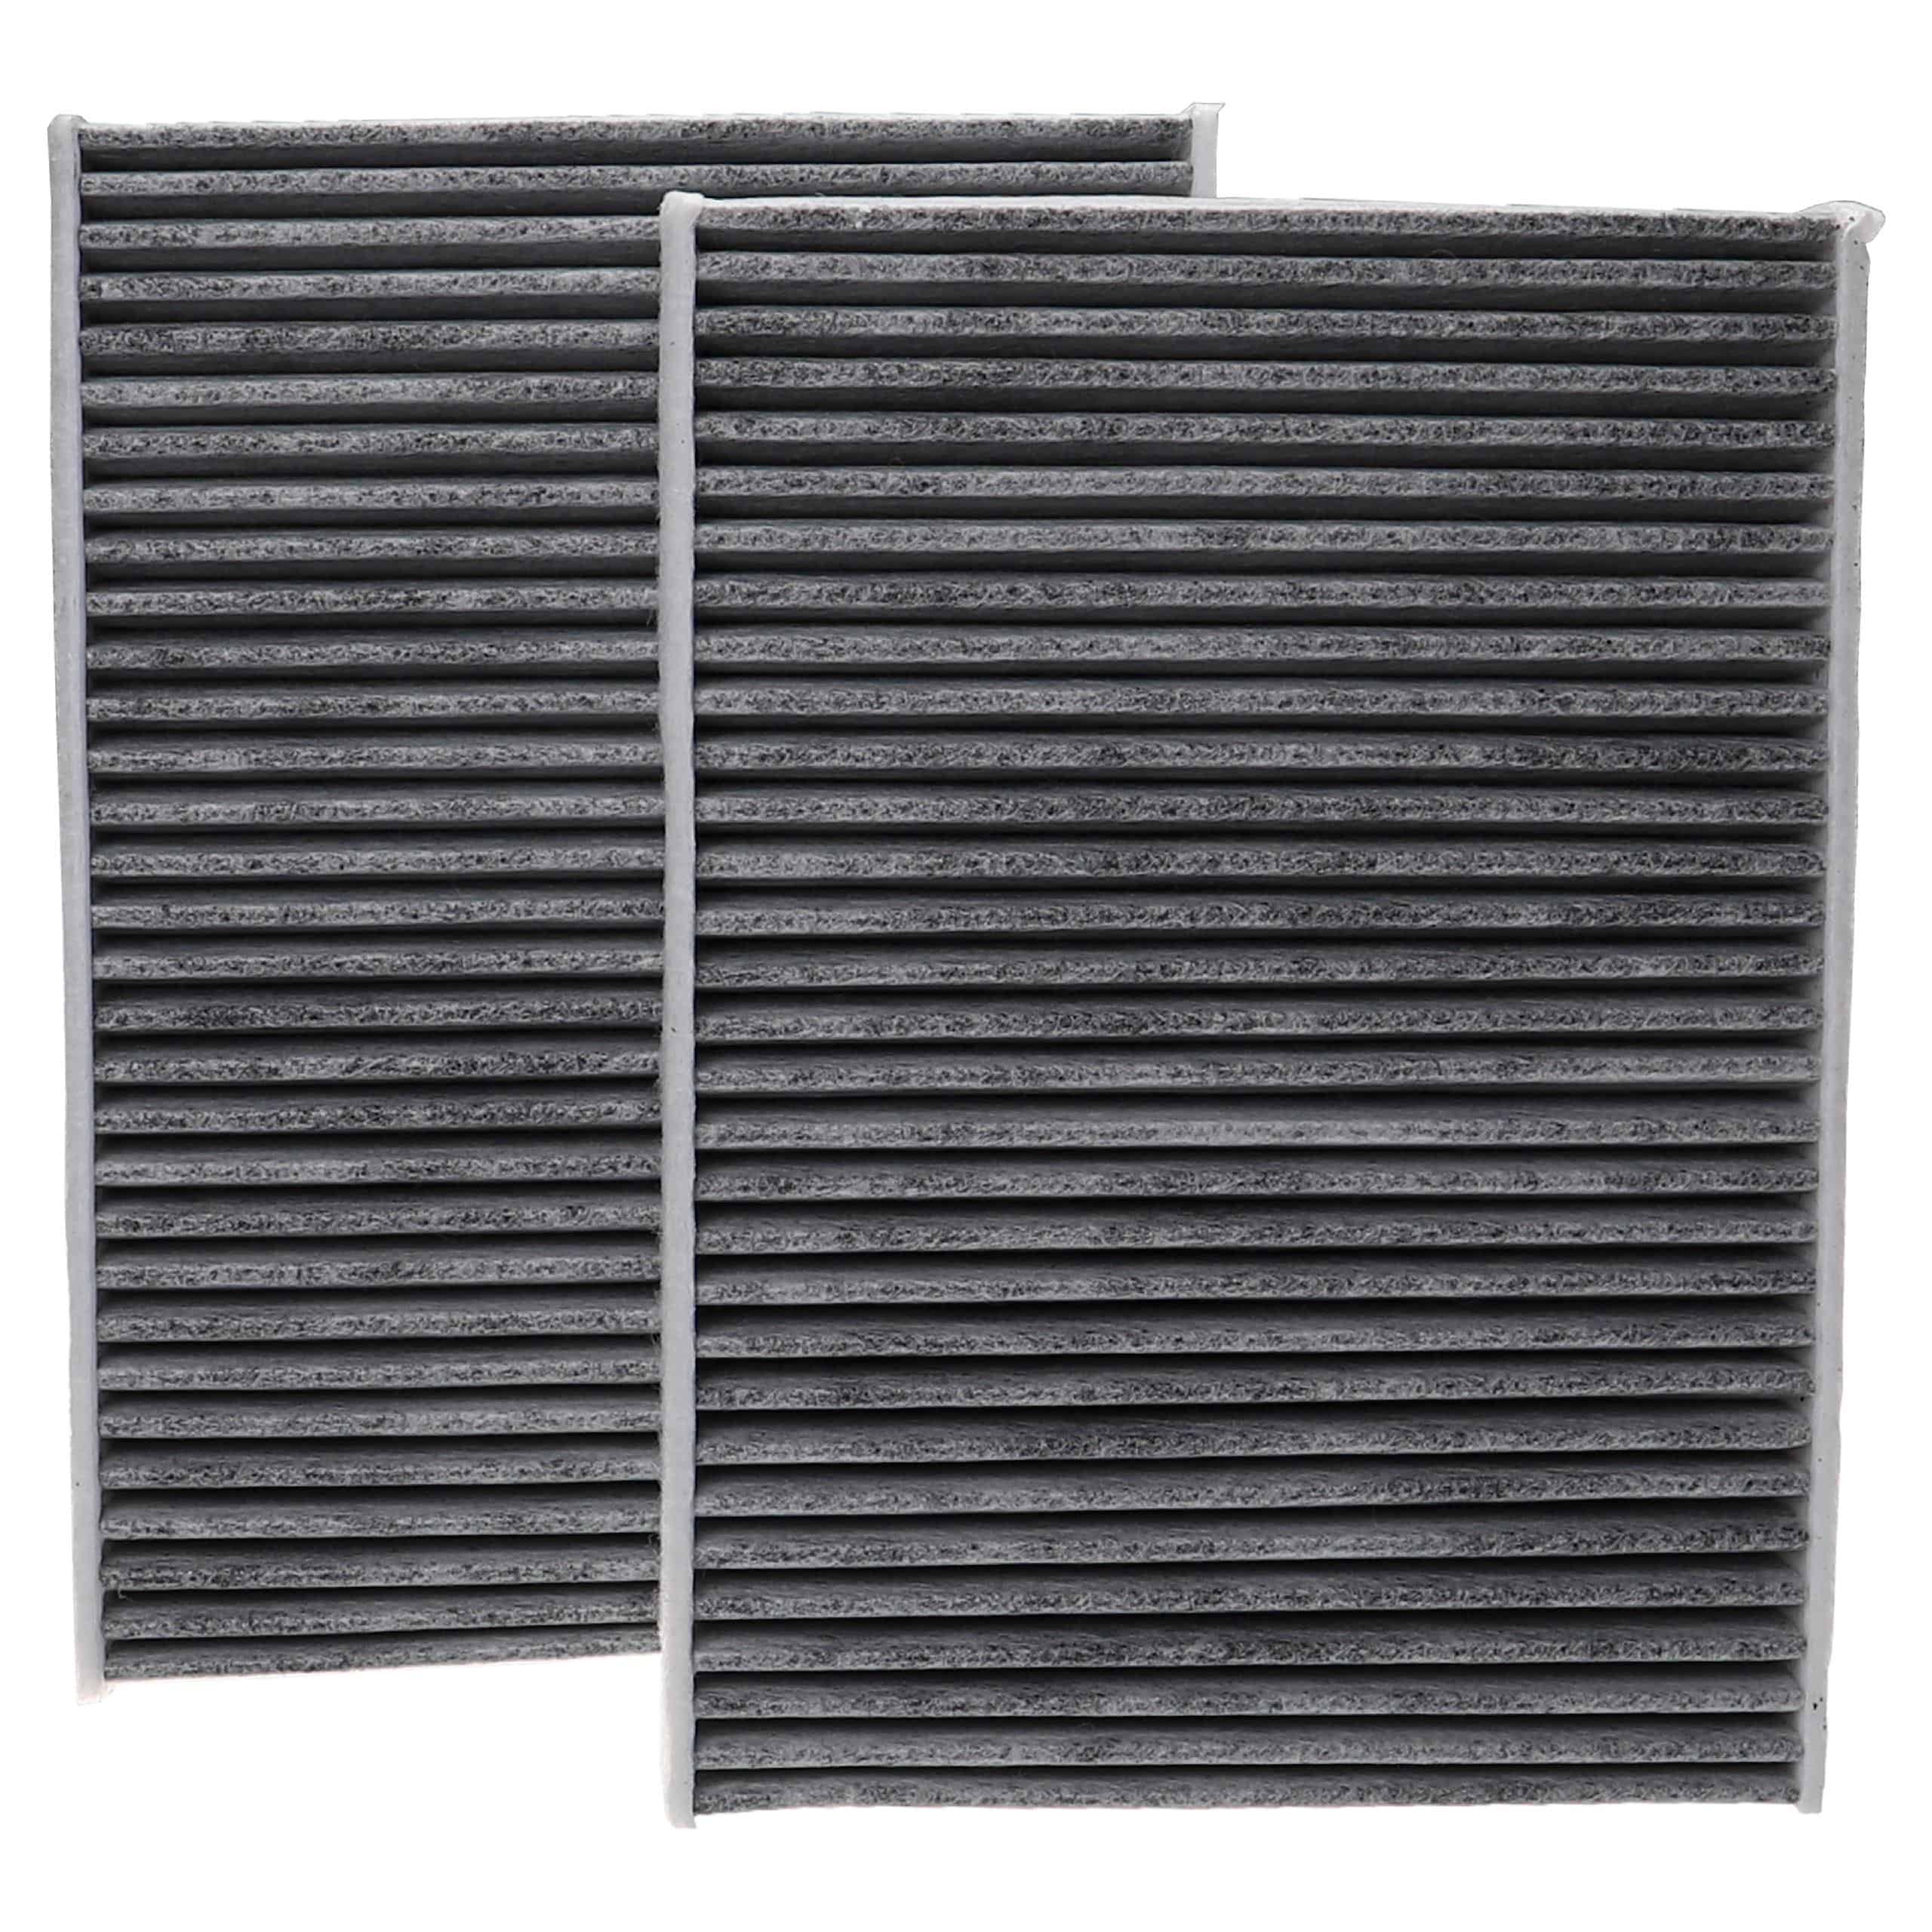 2x Cabin Air Filter replaces 1A First Automotive K30498-2 etc.